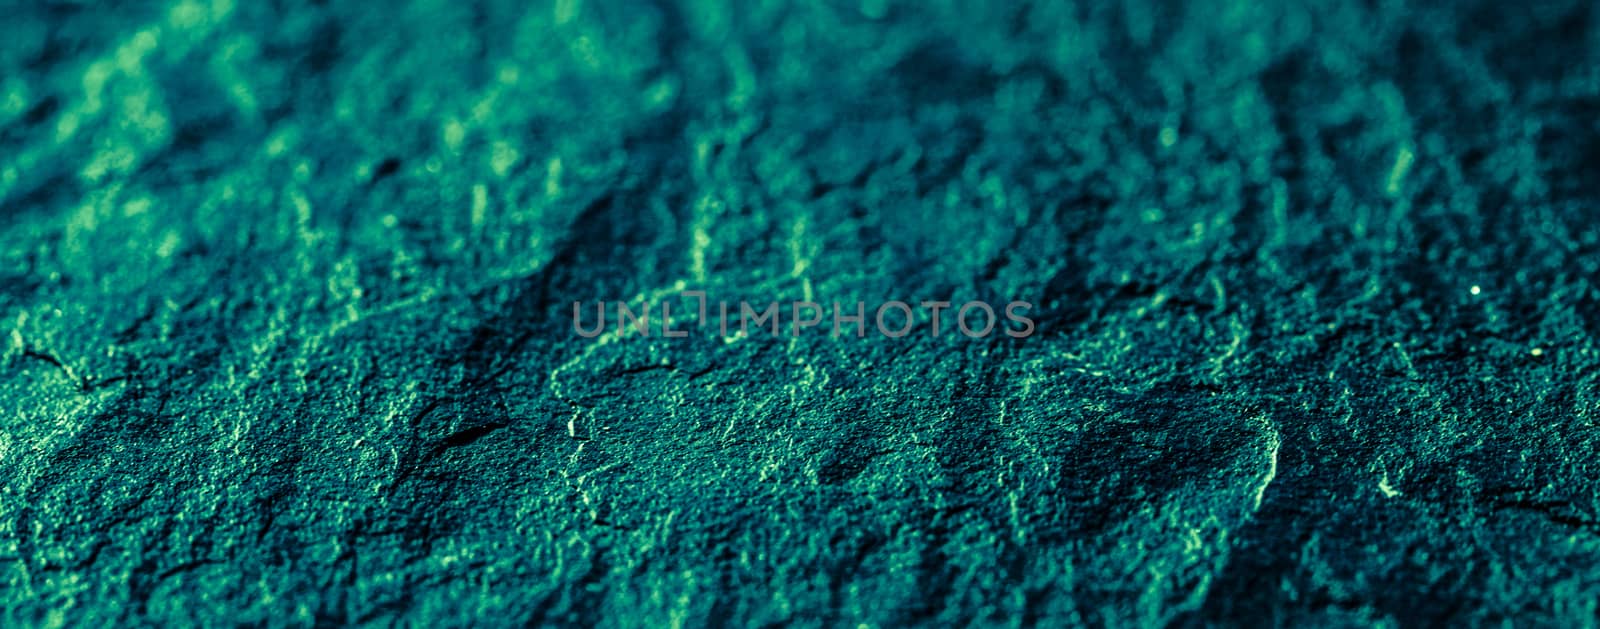 Emerald green stone texture as abstract background, design mater by Anneleven